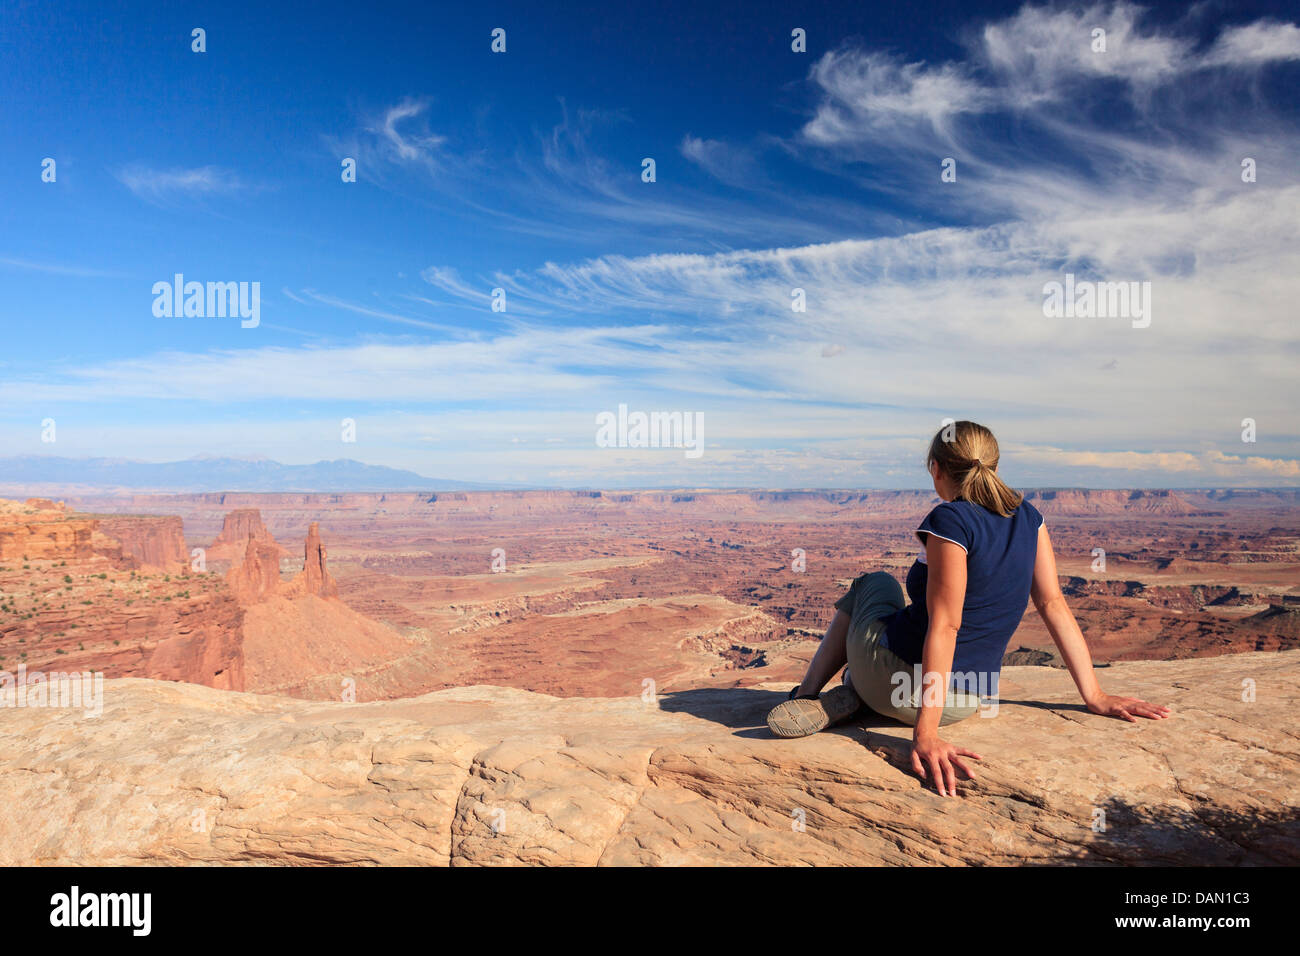 USA, Utah, Canyonlands National Park, Island in the Sky district, Grand View Point Stock Photo